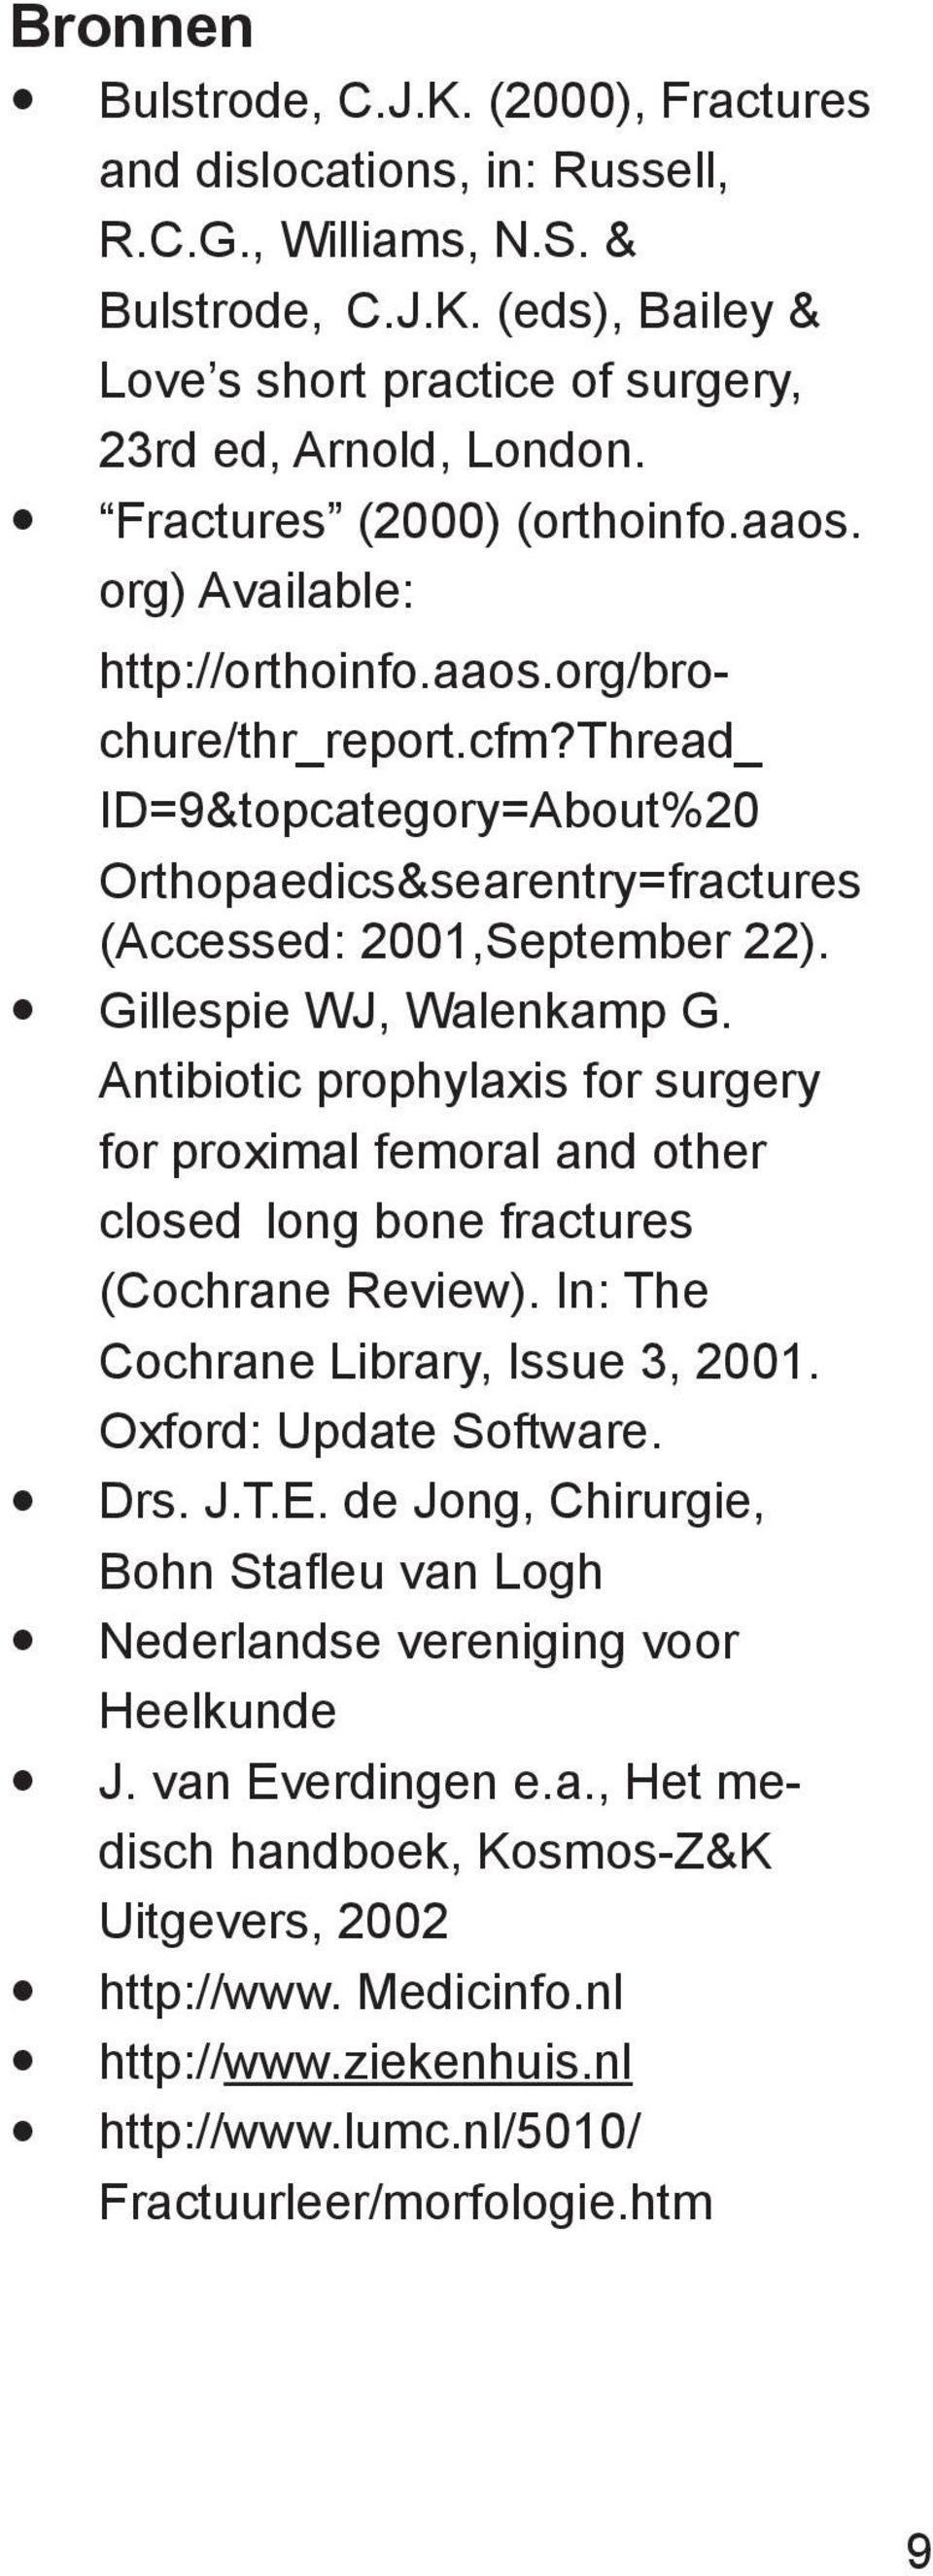 Gillespie WJ, Walenkamp G. Antibiotic prophylaxis for surgery for proximal femoral and other closed long bone fractures (Cochrane Review). In: The Cochrane Library, Issue 3, 2001.